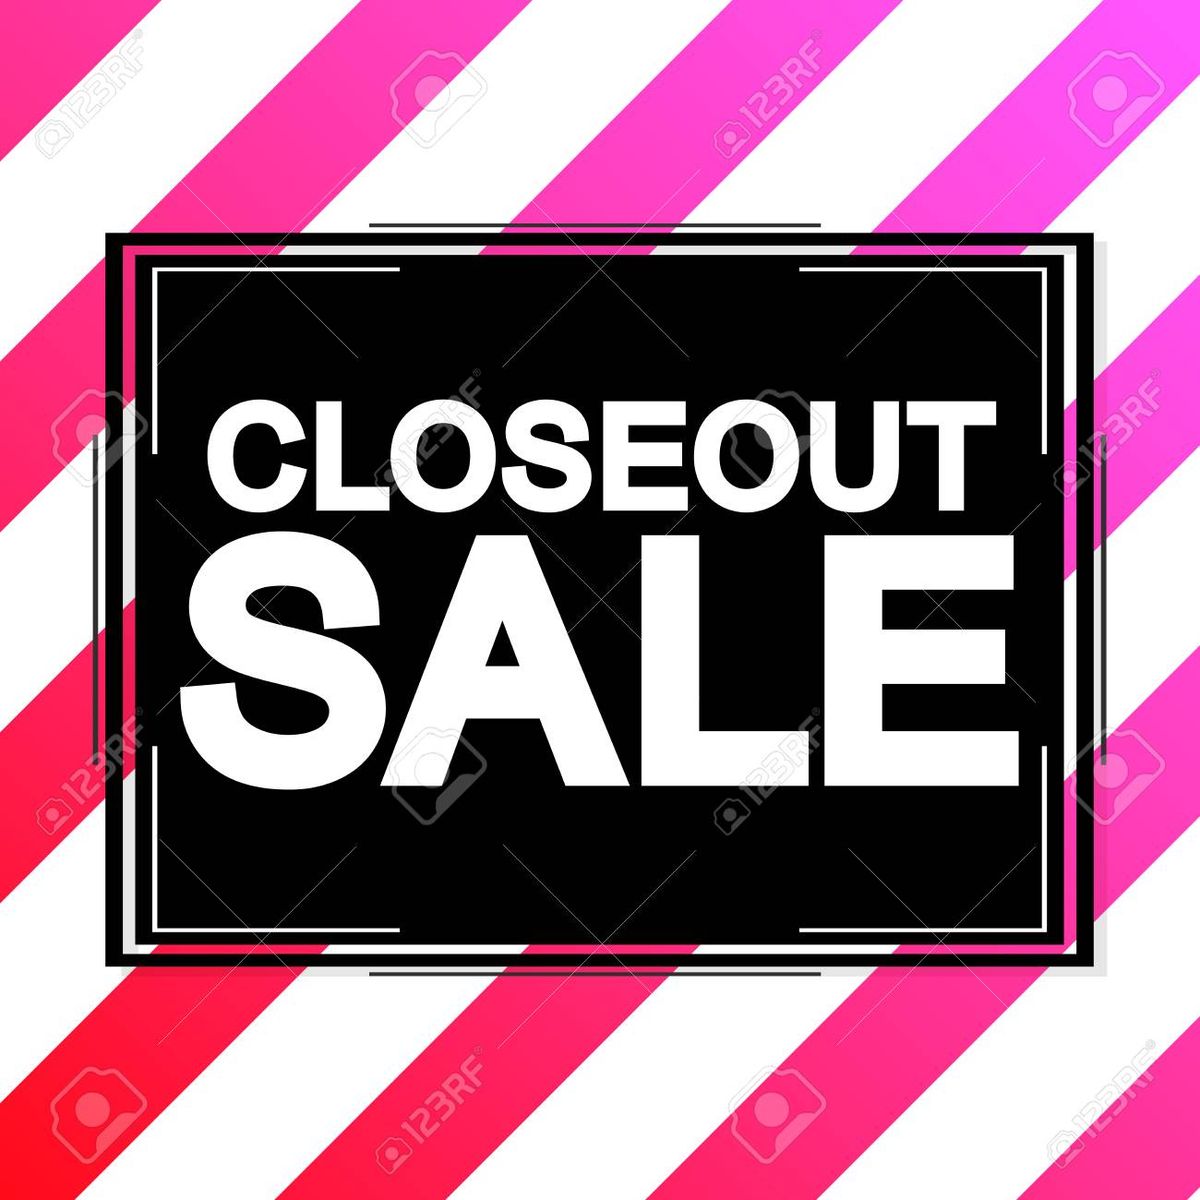 Close Out Sale, Everything must go!! 